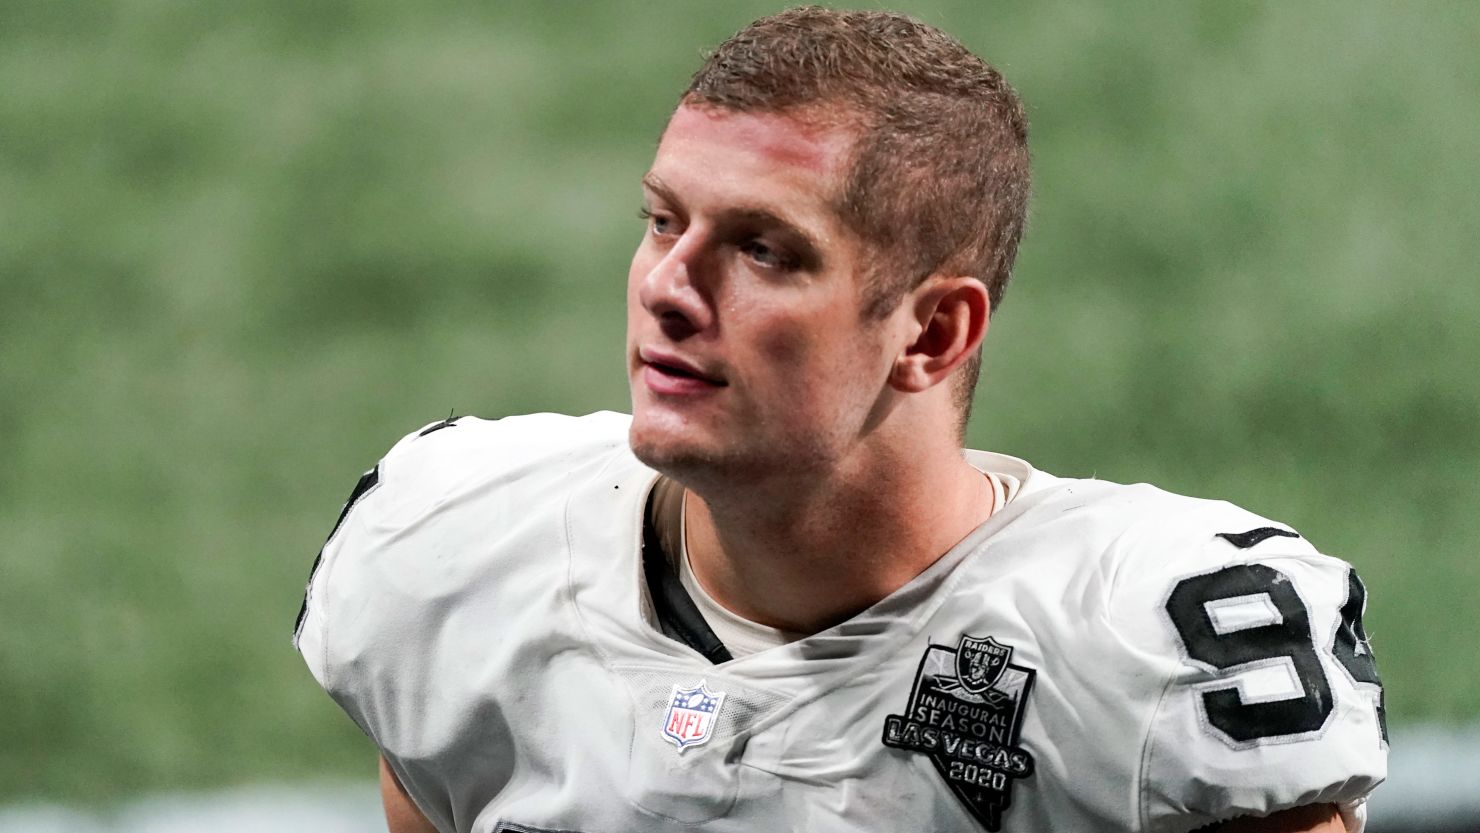 Carl Nassib's coming out announcement was met with congratulations from gay former professional athletes like Jason Collins and Michael Sam. 